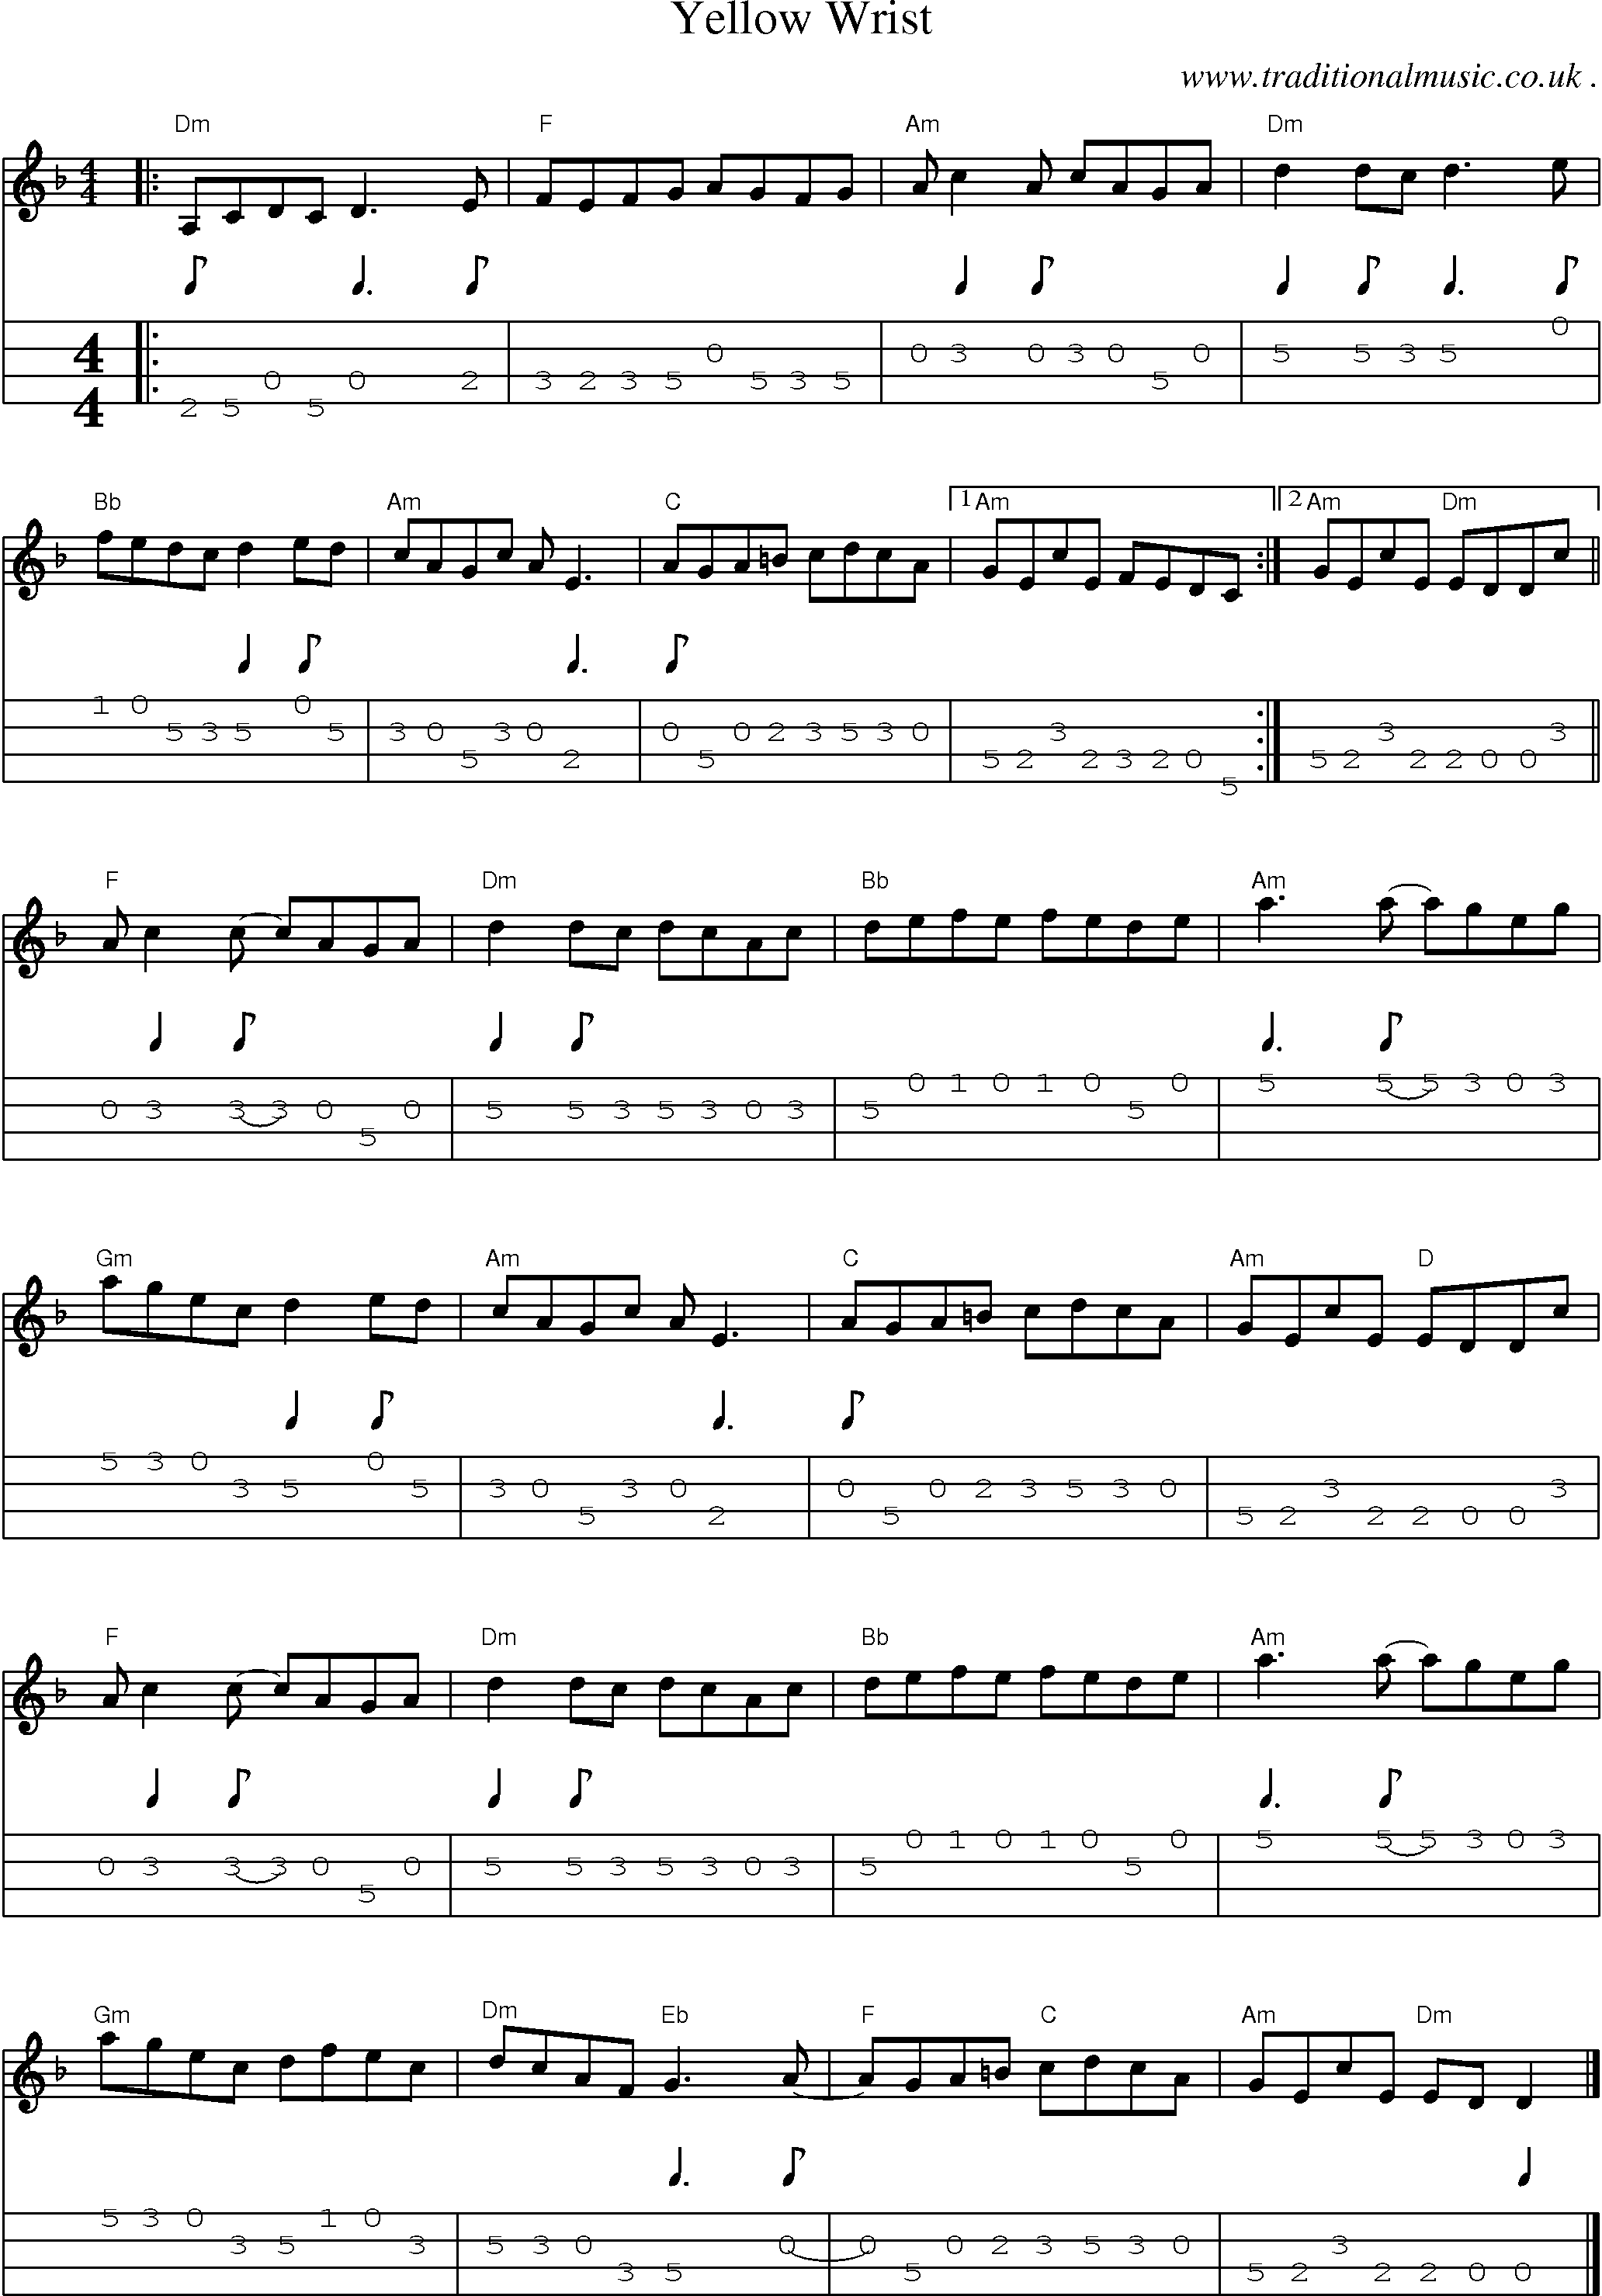 Music Score and Guitar Tabs for Yellow Wrist